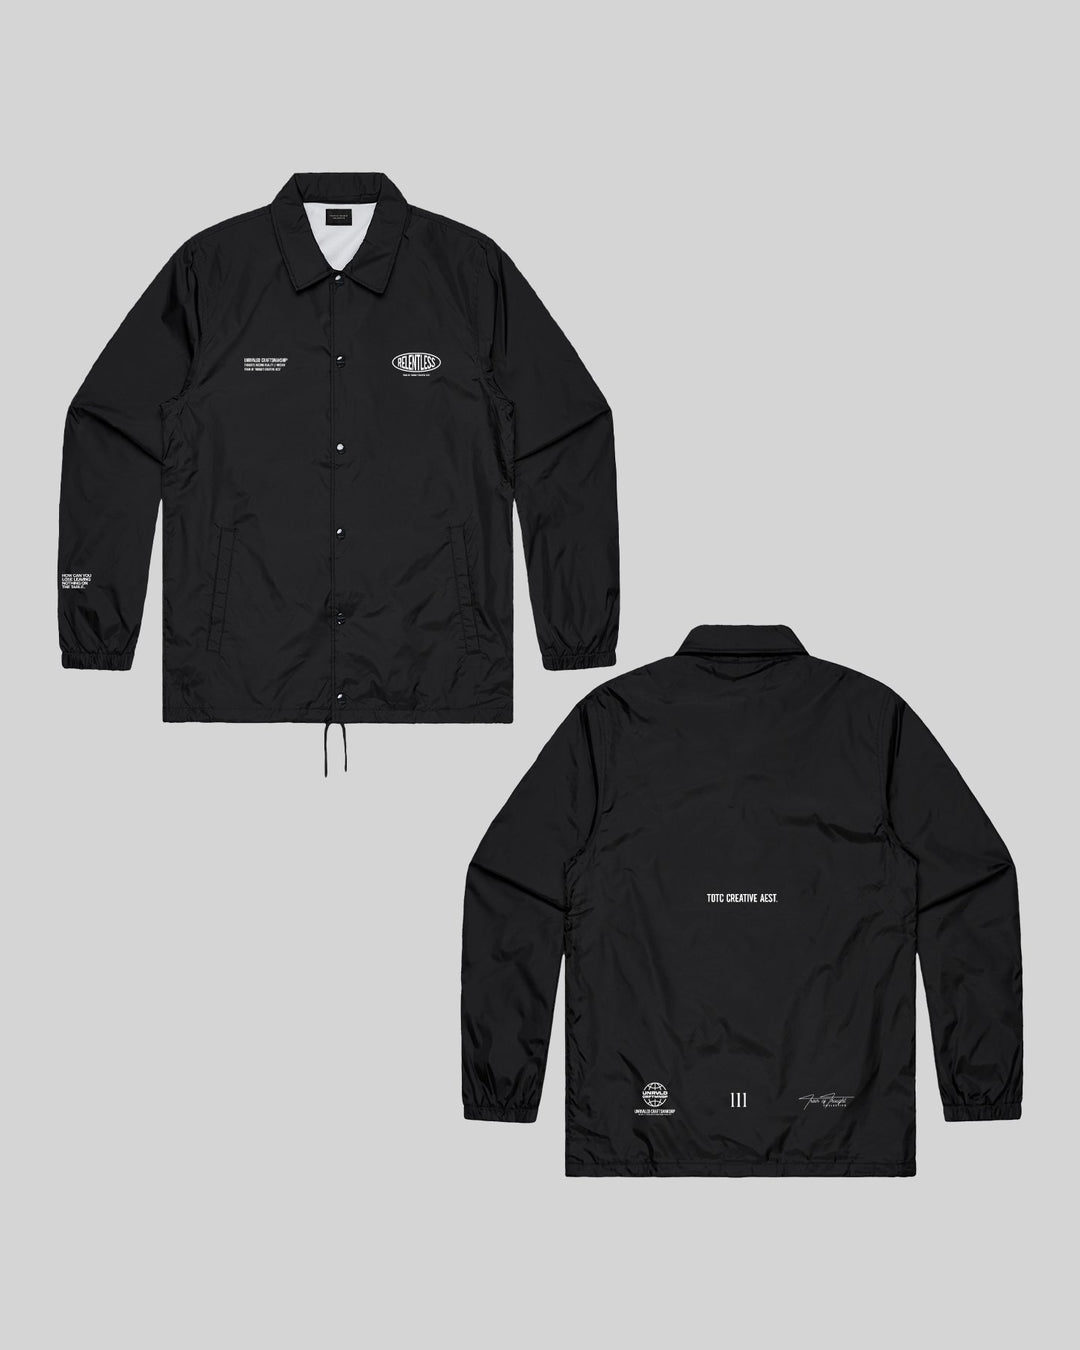 Relentless V1 Coach Black Jacket - trainofthoughtcollective